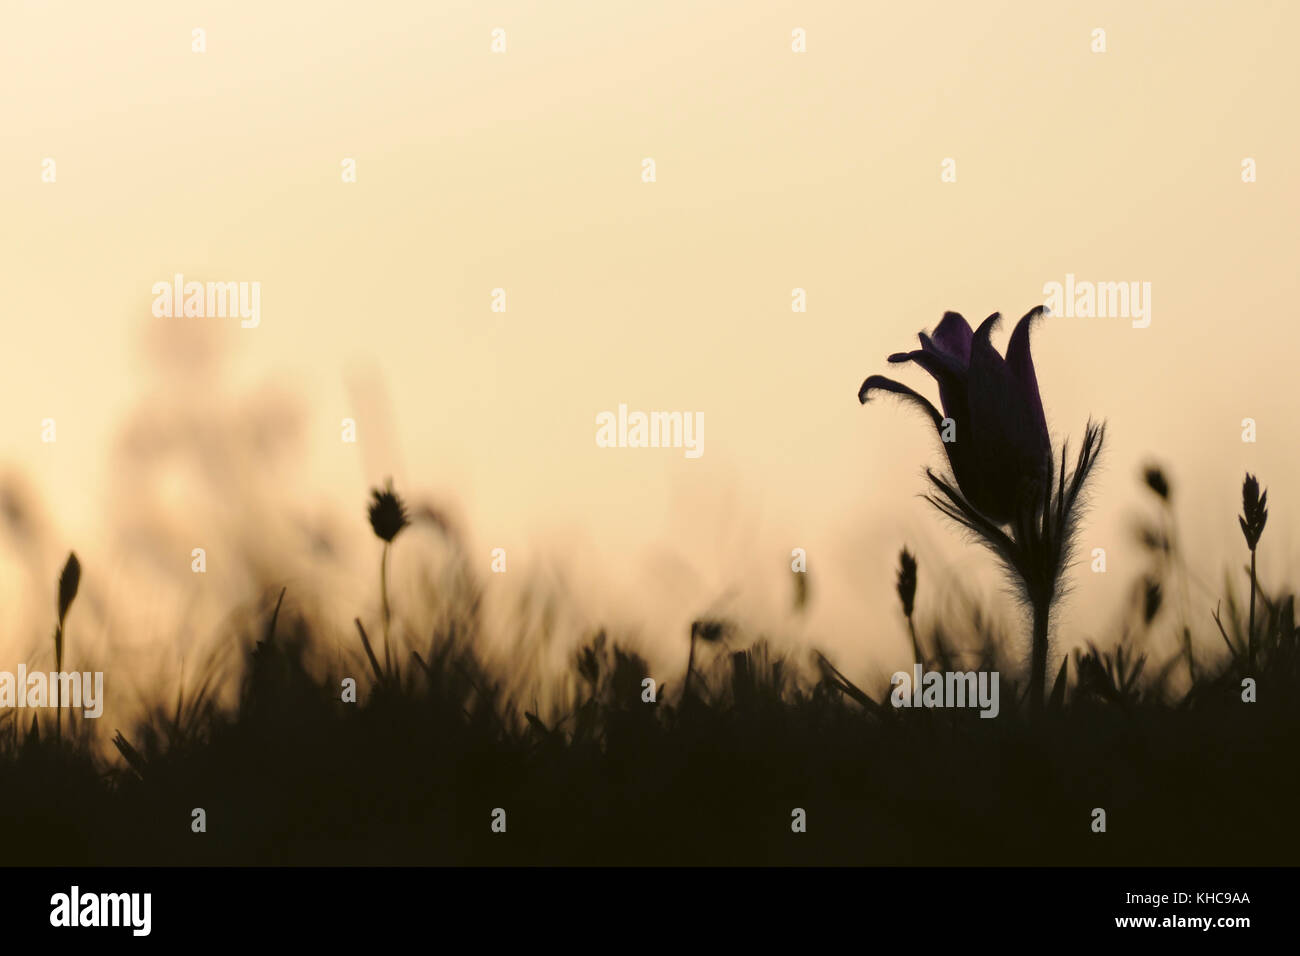 Common Pasque Flower ( Pulsatilla vulgaris ), typical spring flower on low-nutrient grassland, silhouetted against orange coloured evening sky, Europe Stock Photo